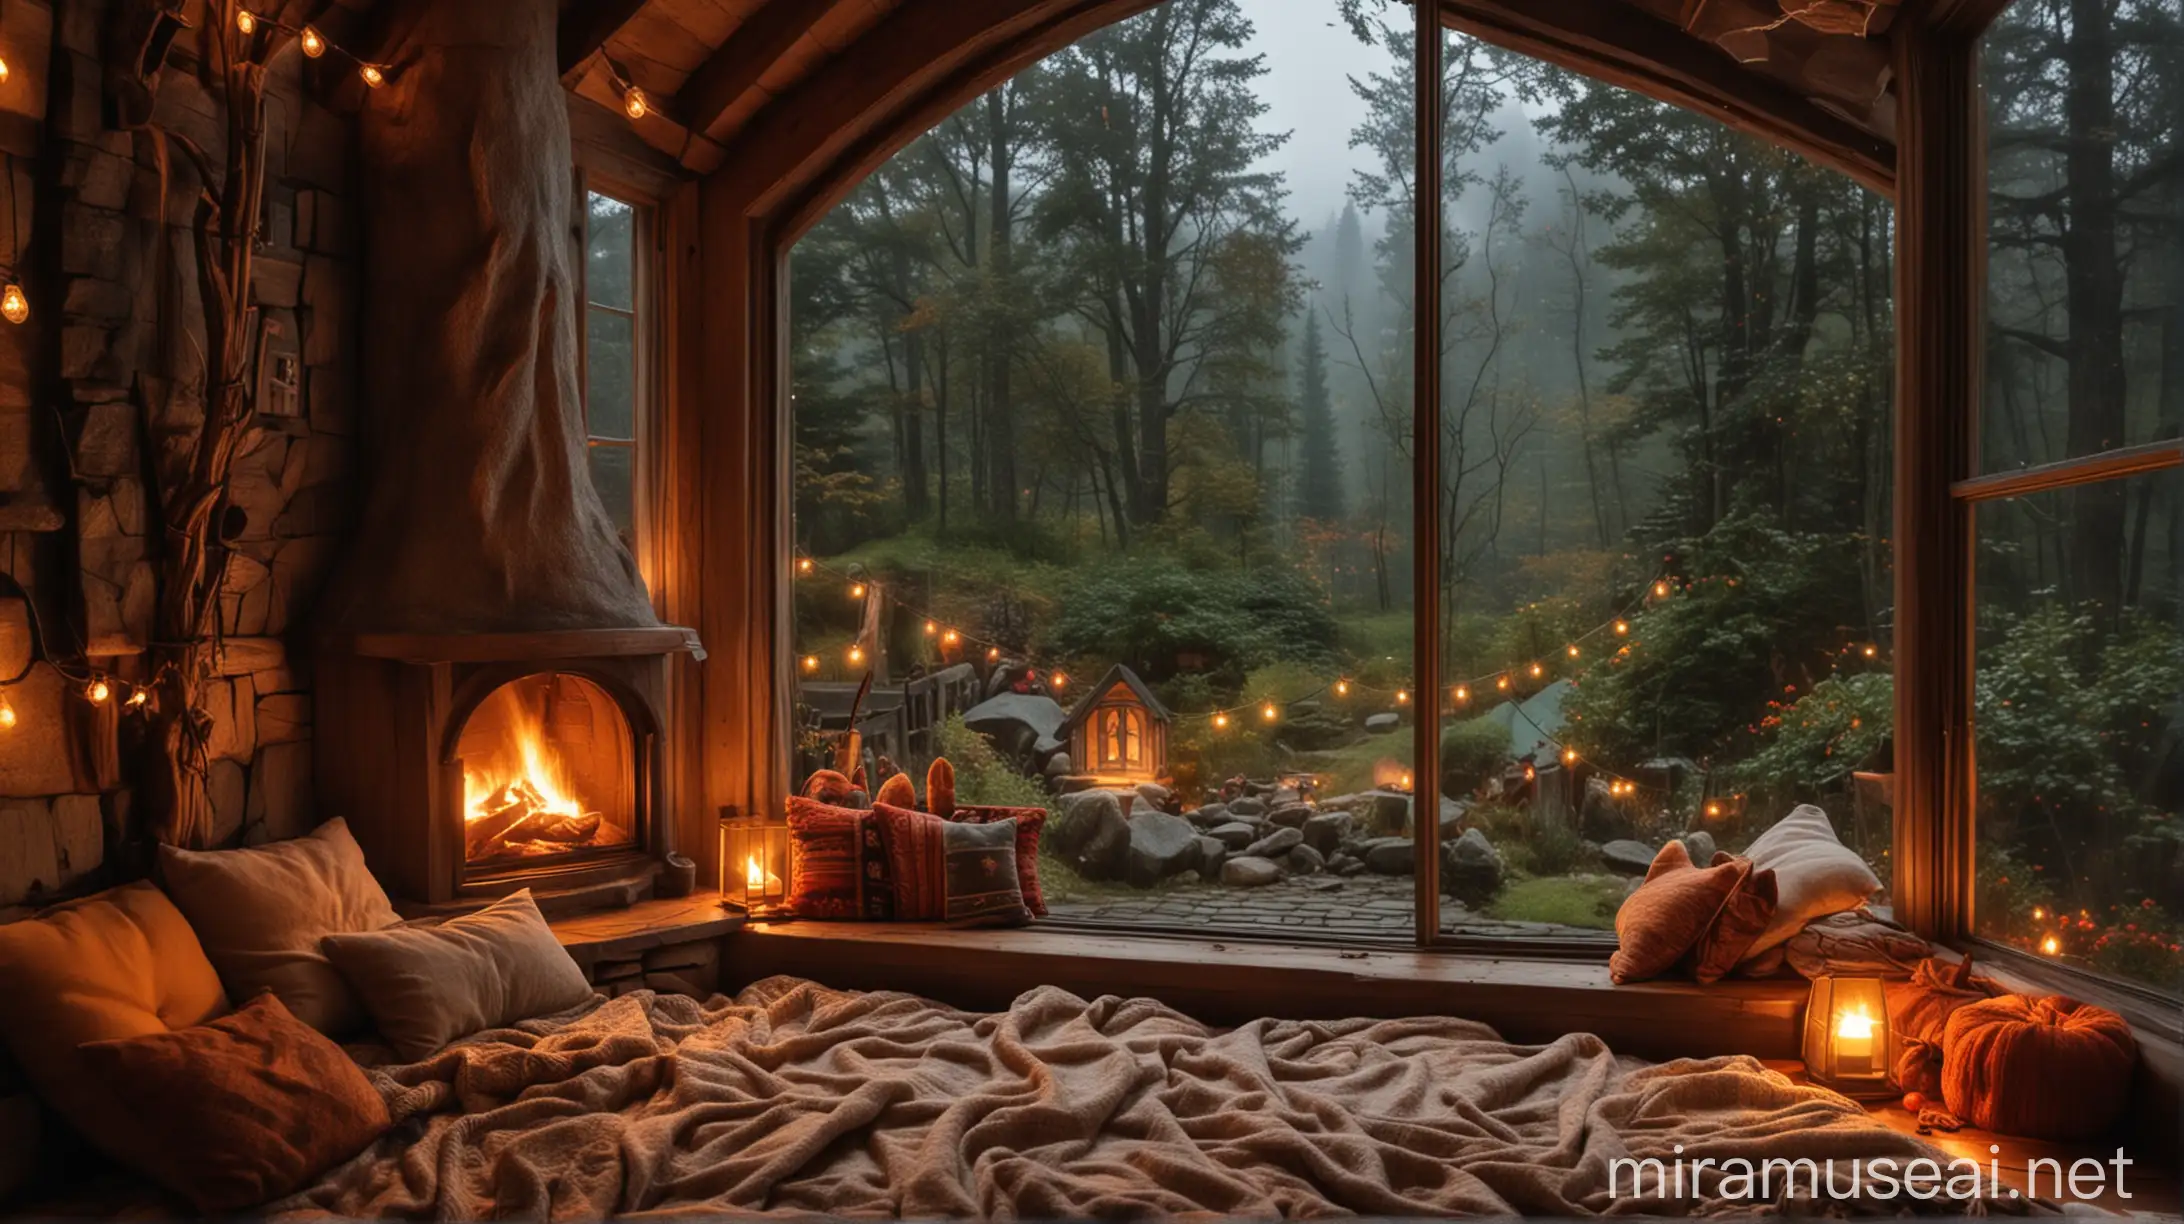 Cozy Hobbit House Room with Fireplace and Forest View